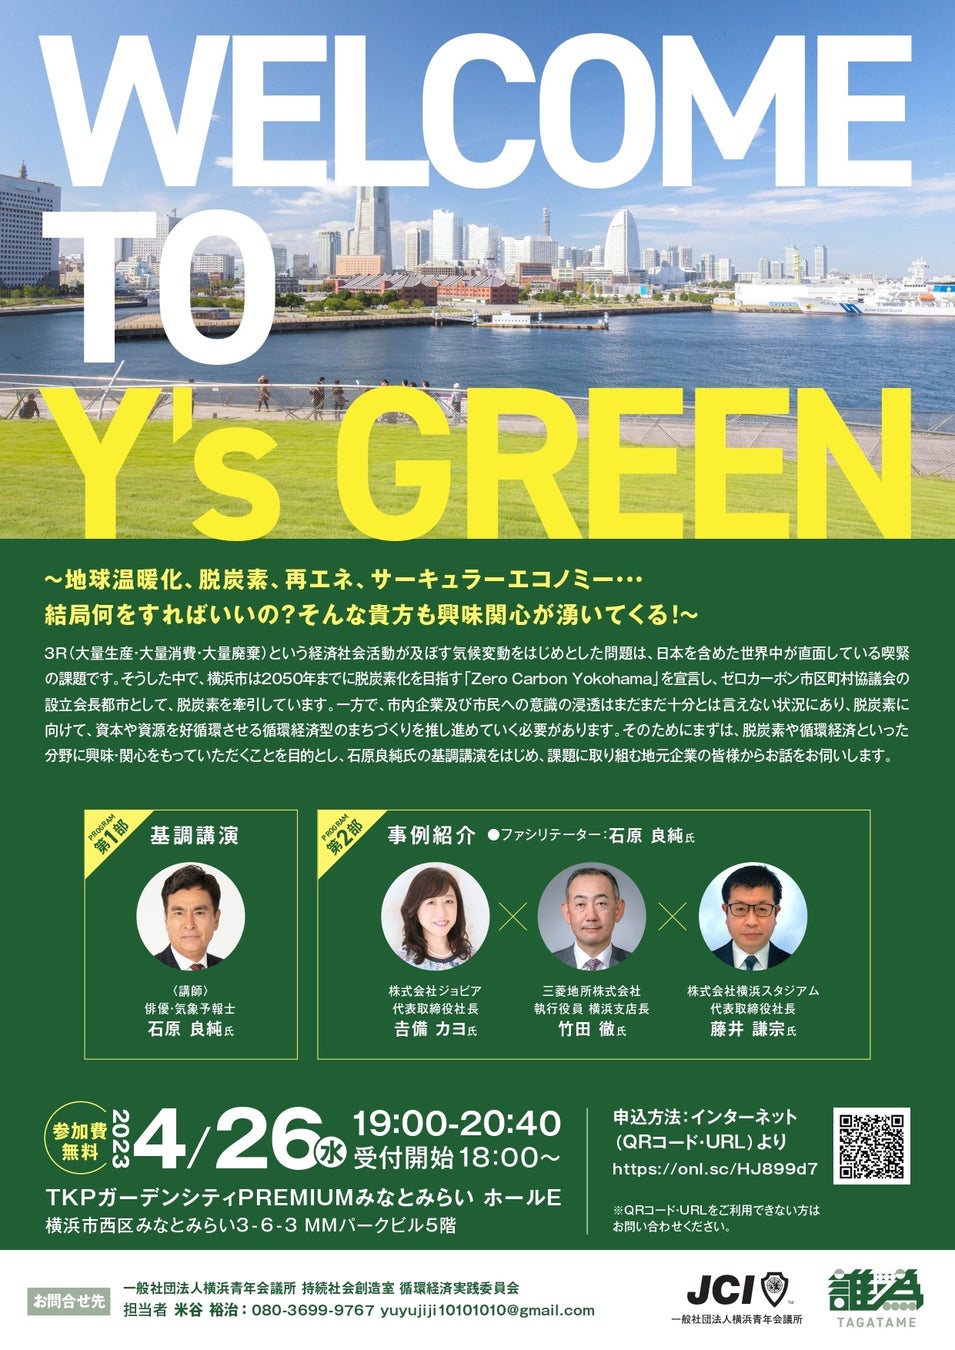 Welcome to Y’s Green 開催のご案内のサブ画像2